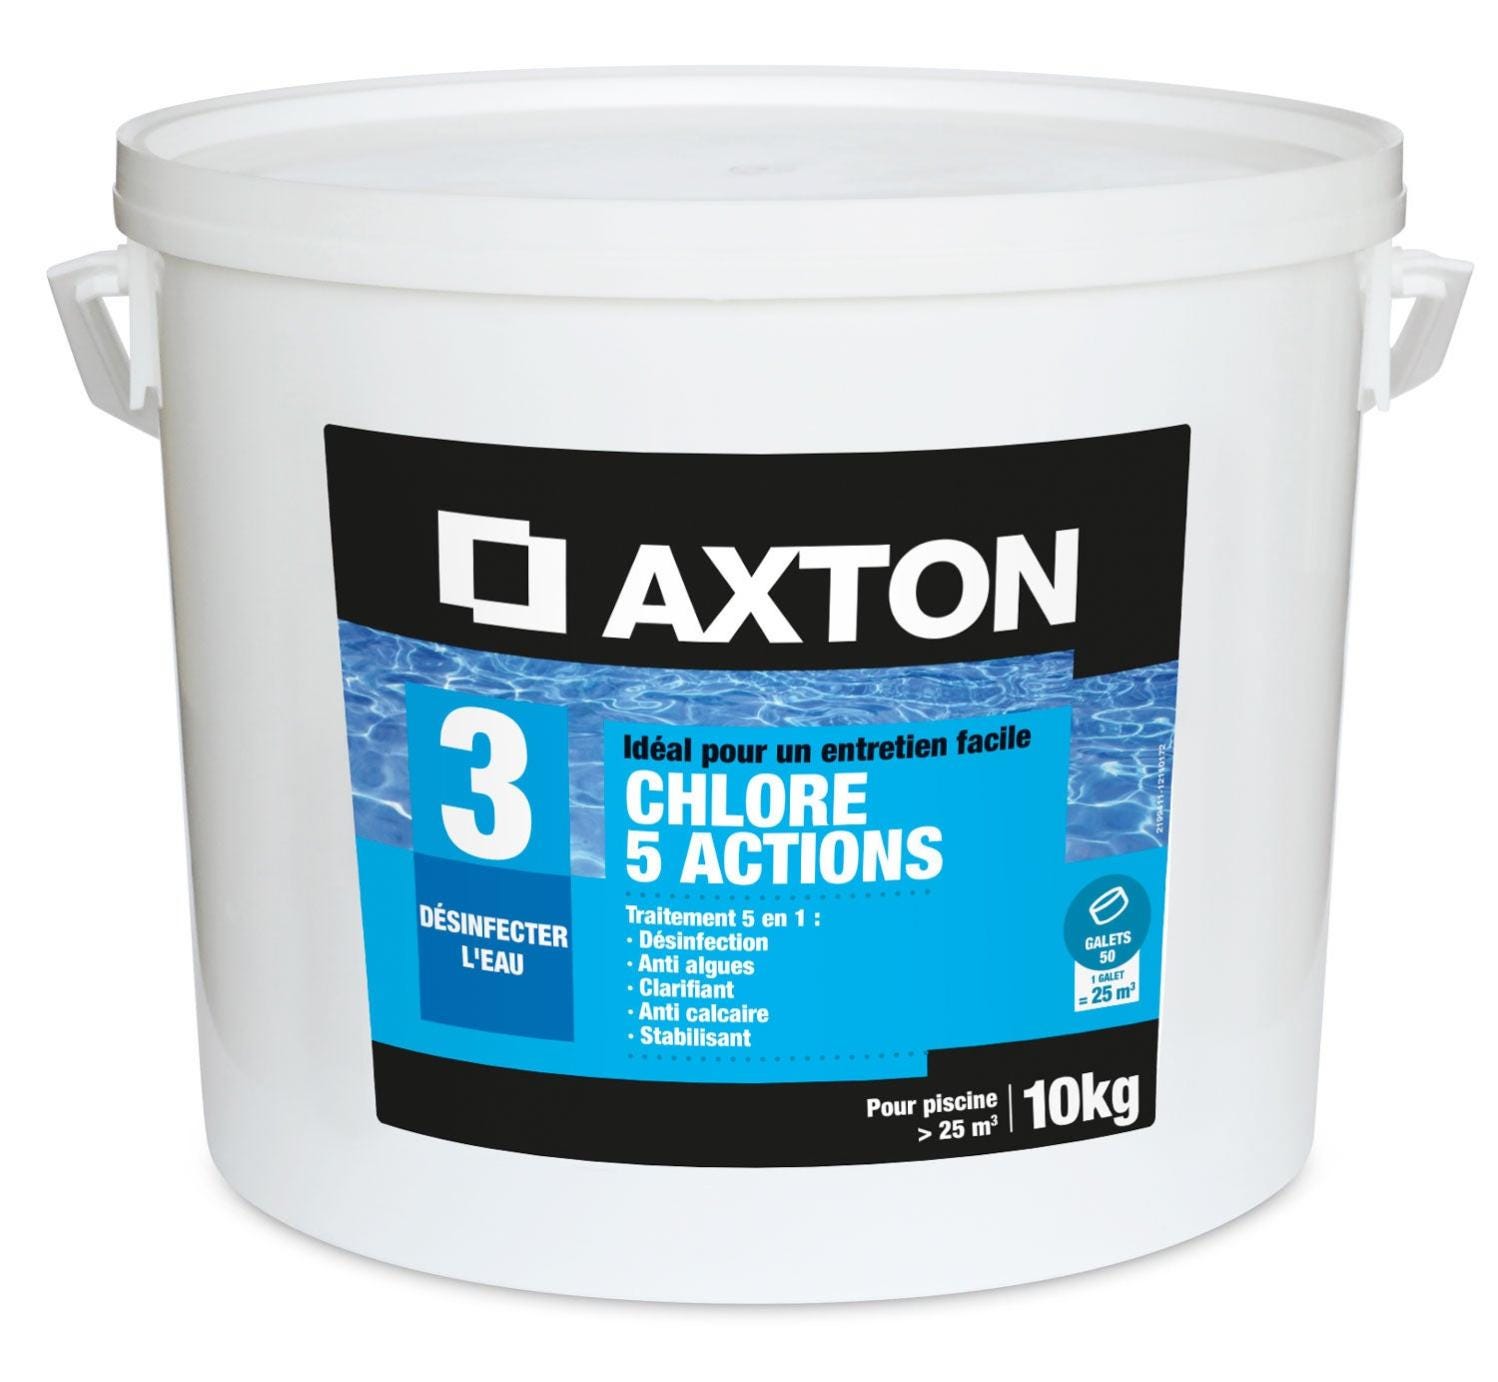 Chlore 5 actions galets 200 g AXTON, 10 kg